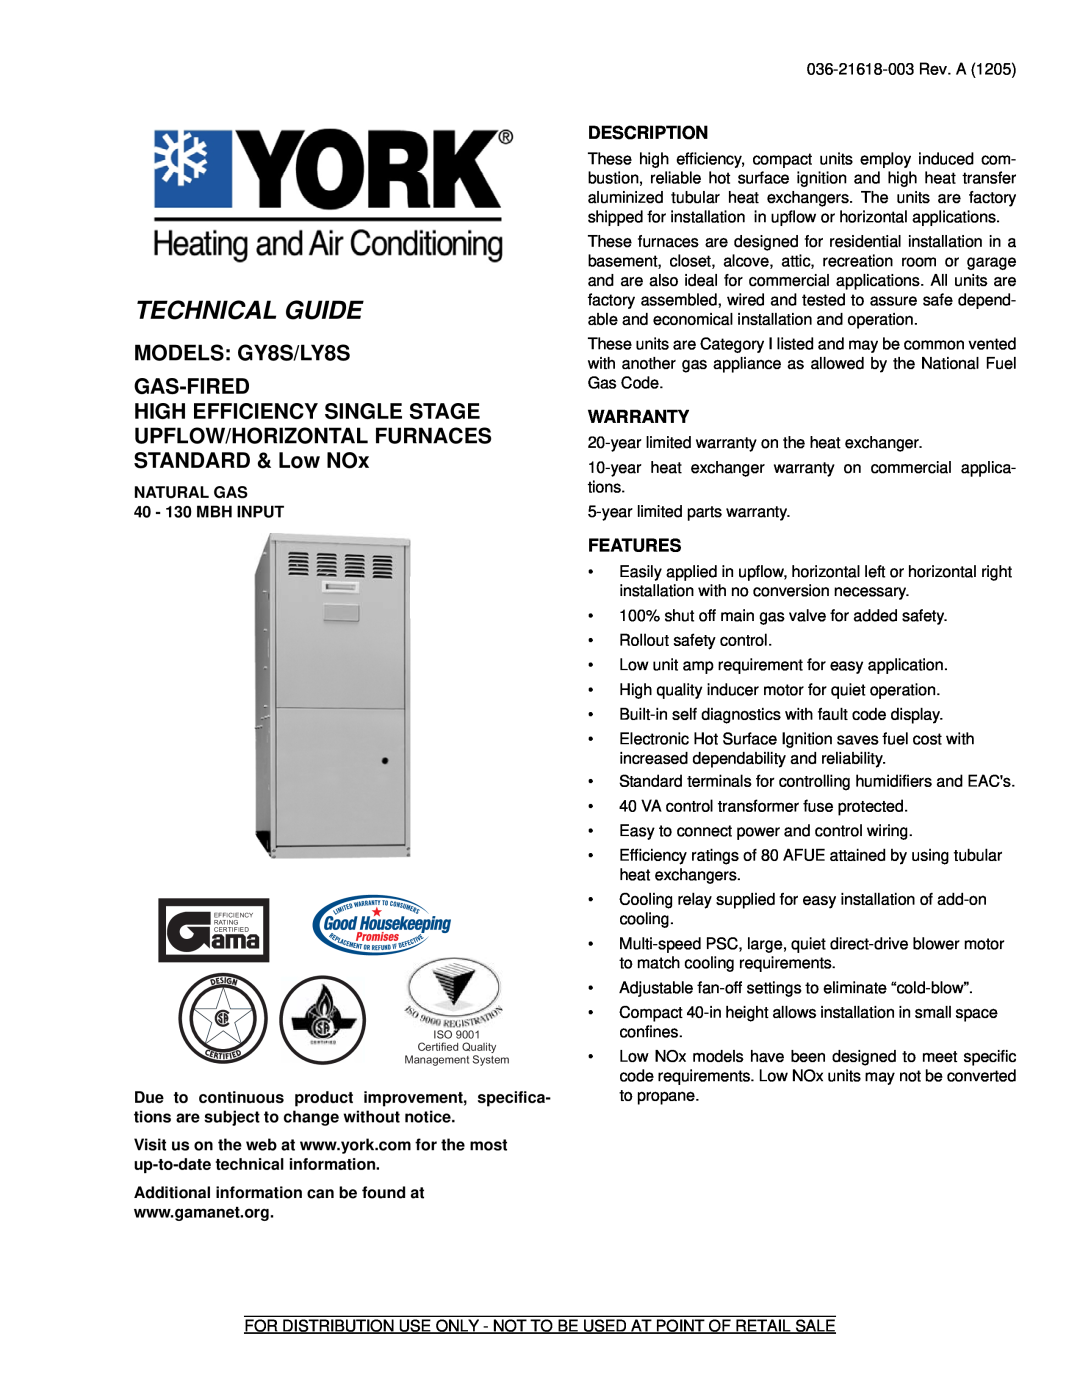 York warranty Description, Warranty, Features, Technical Guide, MODELS GY8S/LY8S GAS-FIRED 